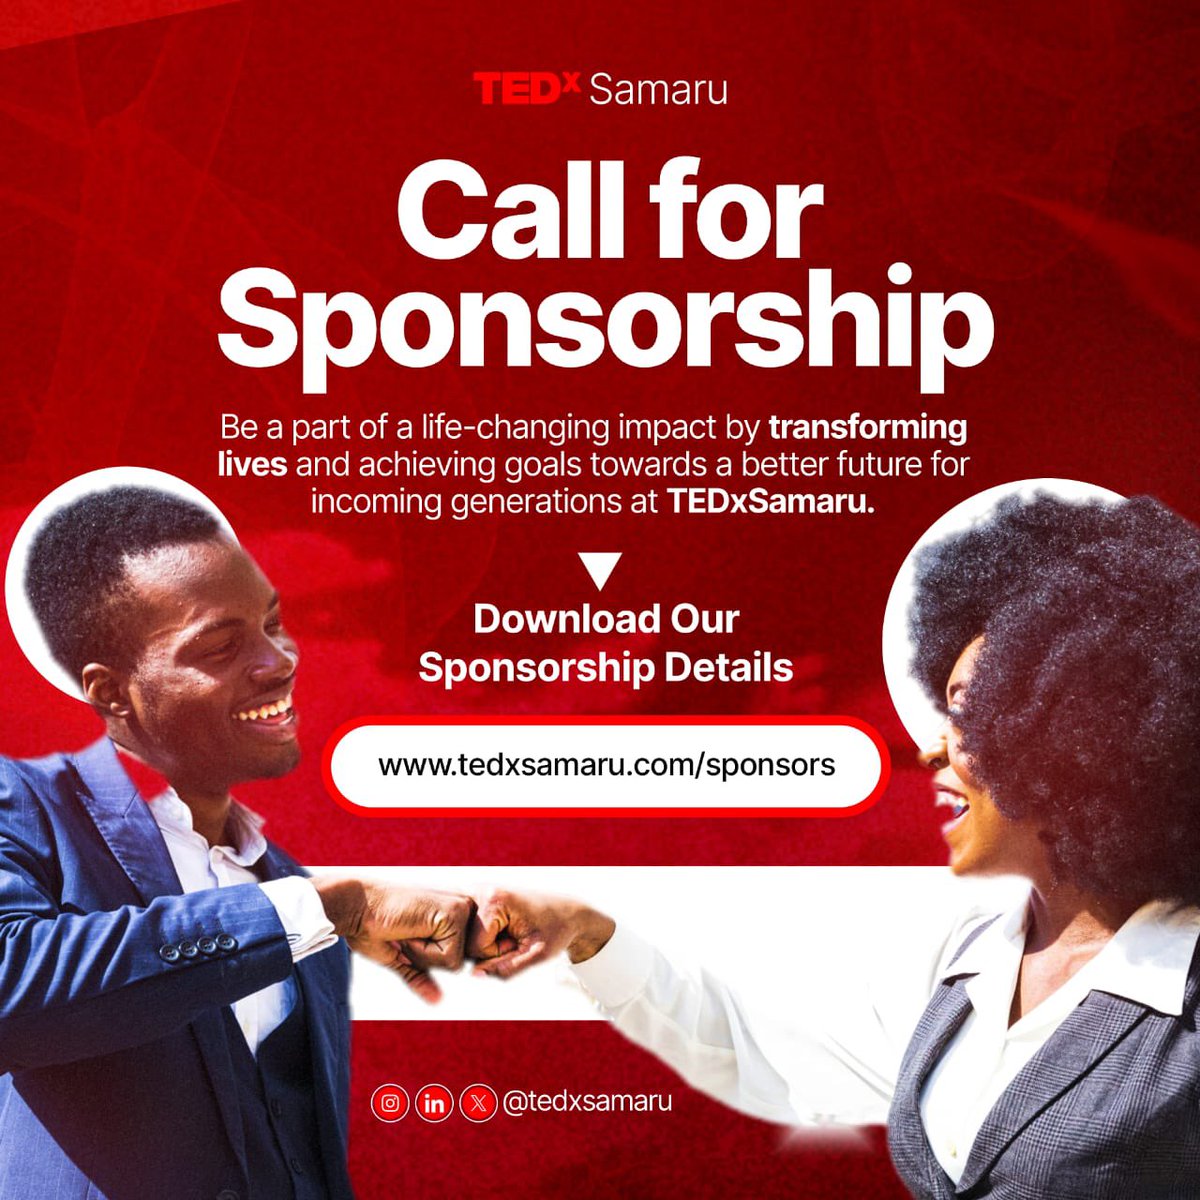 Across Zaria,  young minds are brimming with ideas that hold the potential to propel us towards a brighter future.

Invest in the future of Africa. 

Click on the link below

👇🏾👇🏾👇🏾
tedxsamaru.com/sponsors

#TEDxSamaru #TEDxTalks #TEDx  #SponsorChange #InvestInIdeas #AfricaRising